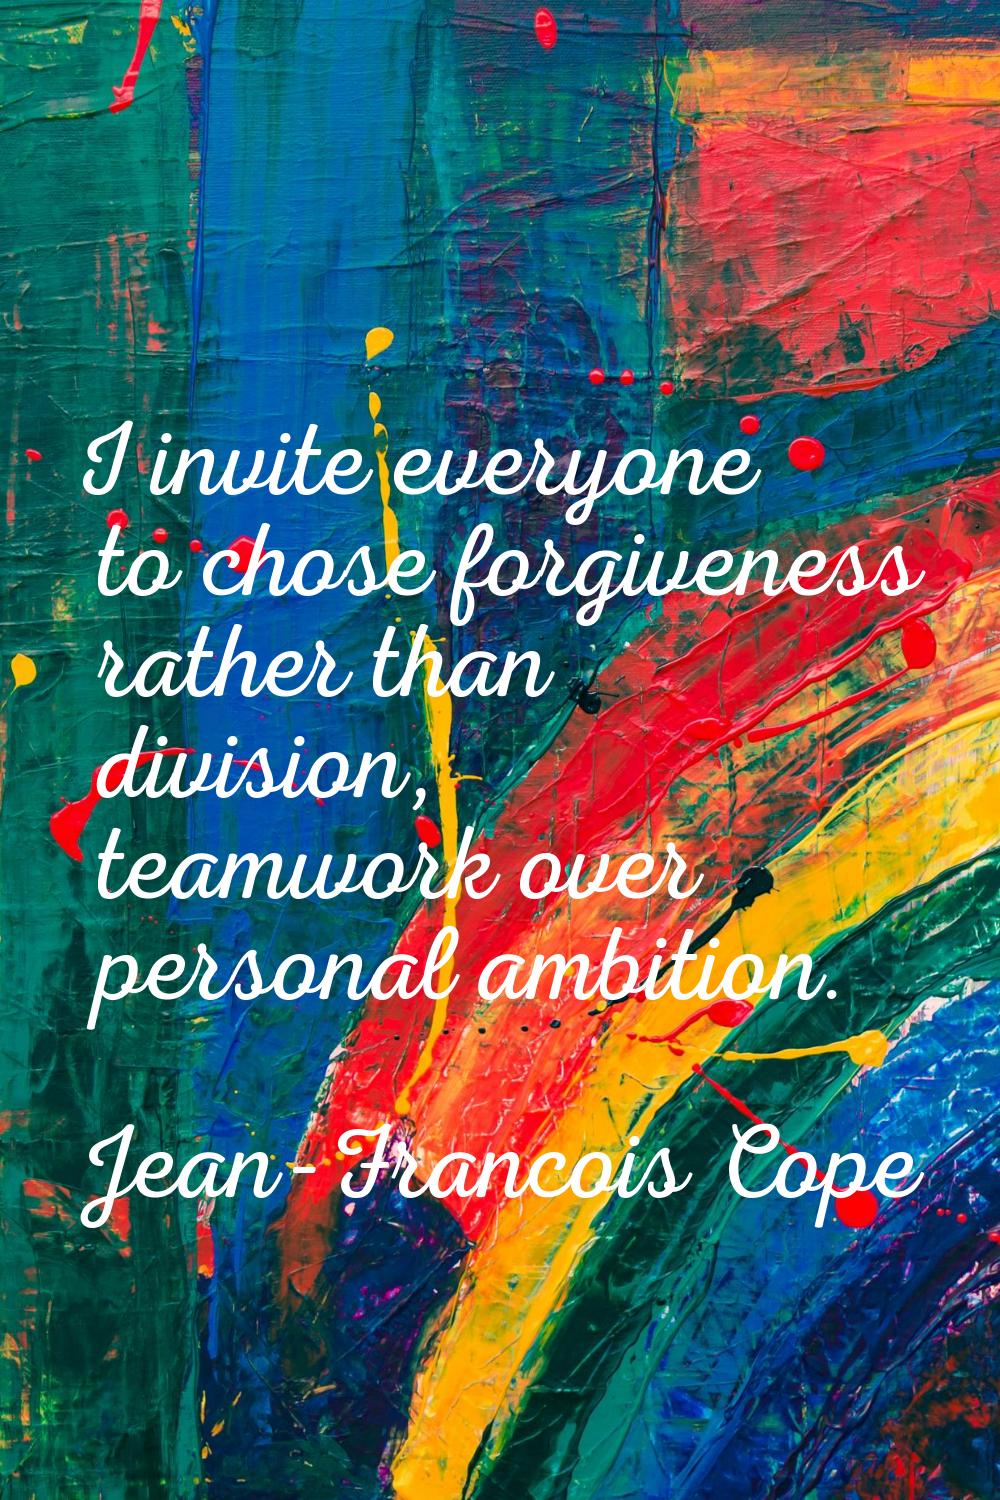 I invite everyone to chose forgiveness rather than division, teamwork over personal ambition.